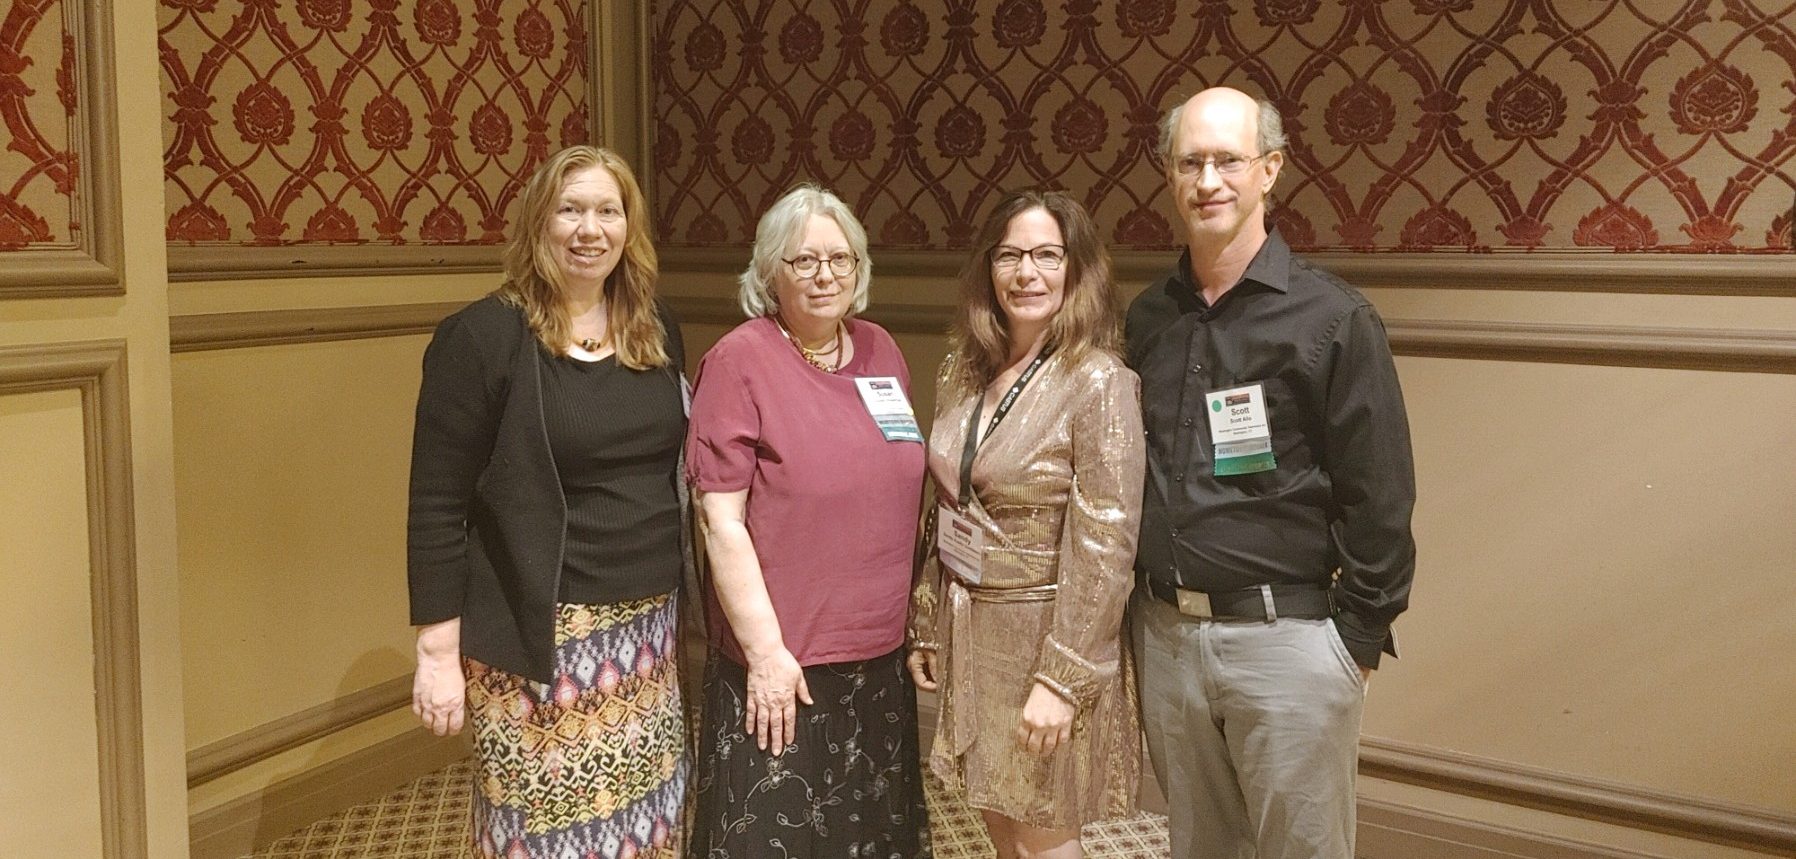 Photo of Jen Evans (West Hartford Community Interactive), Susan Huizenga (Wallingford Public Access Association), Sandy Austin Goldstein & Scott Allo (Newington Community TV)at the Hometown Media Awards celebration, during the 2022 ACM conference in Chicago.